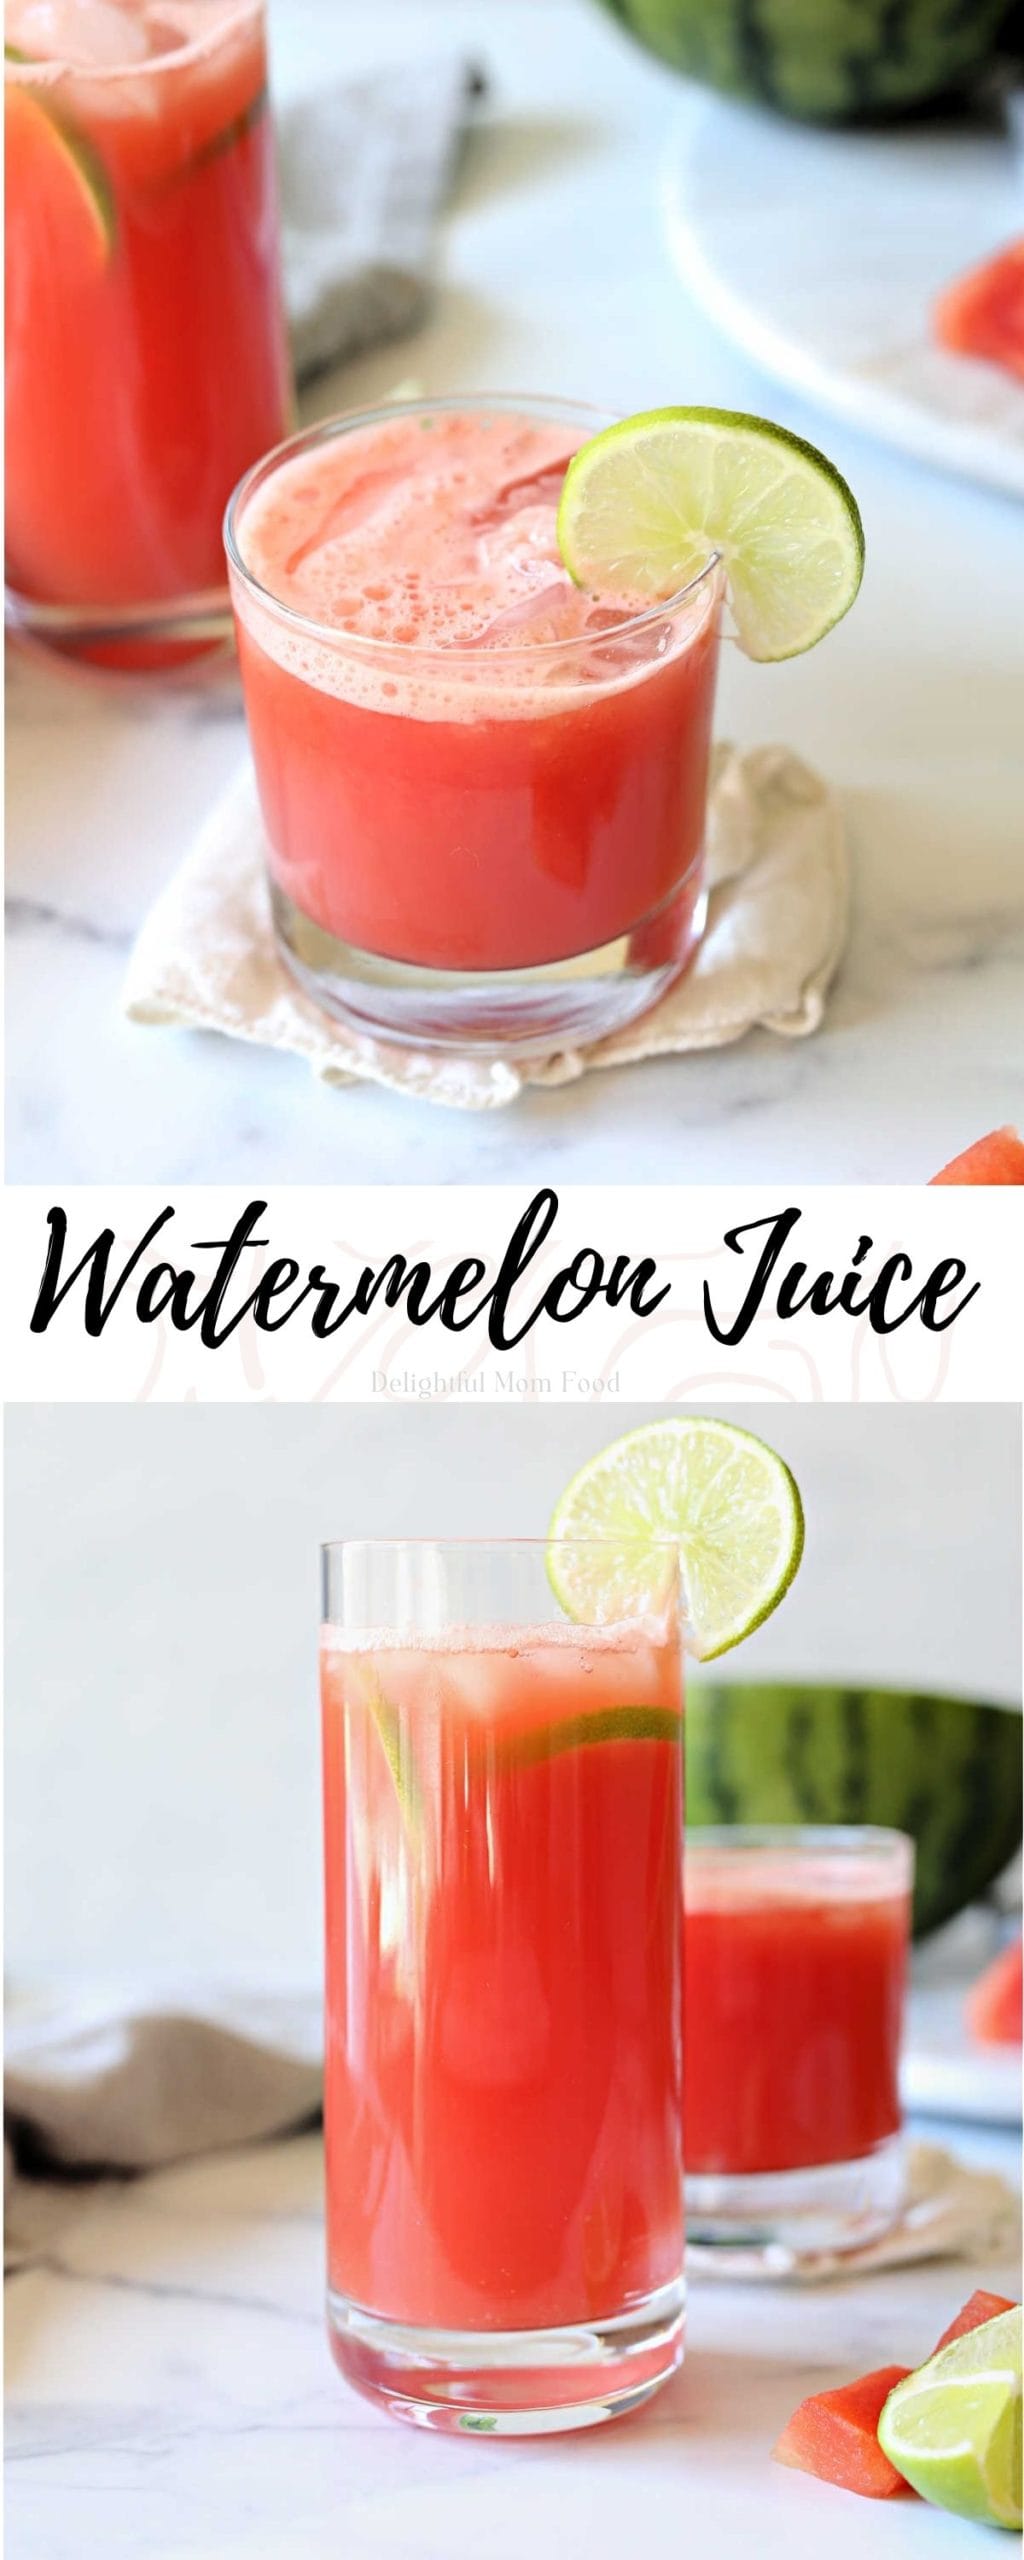 Fresh homemade juice made with watermelon and limes served in a tall glass